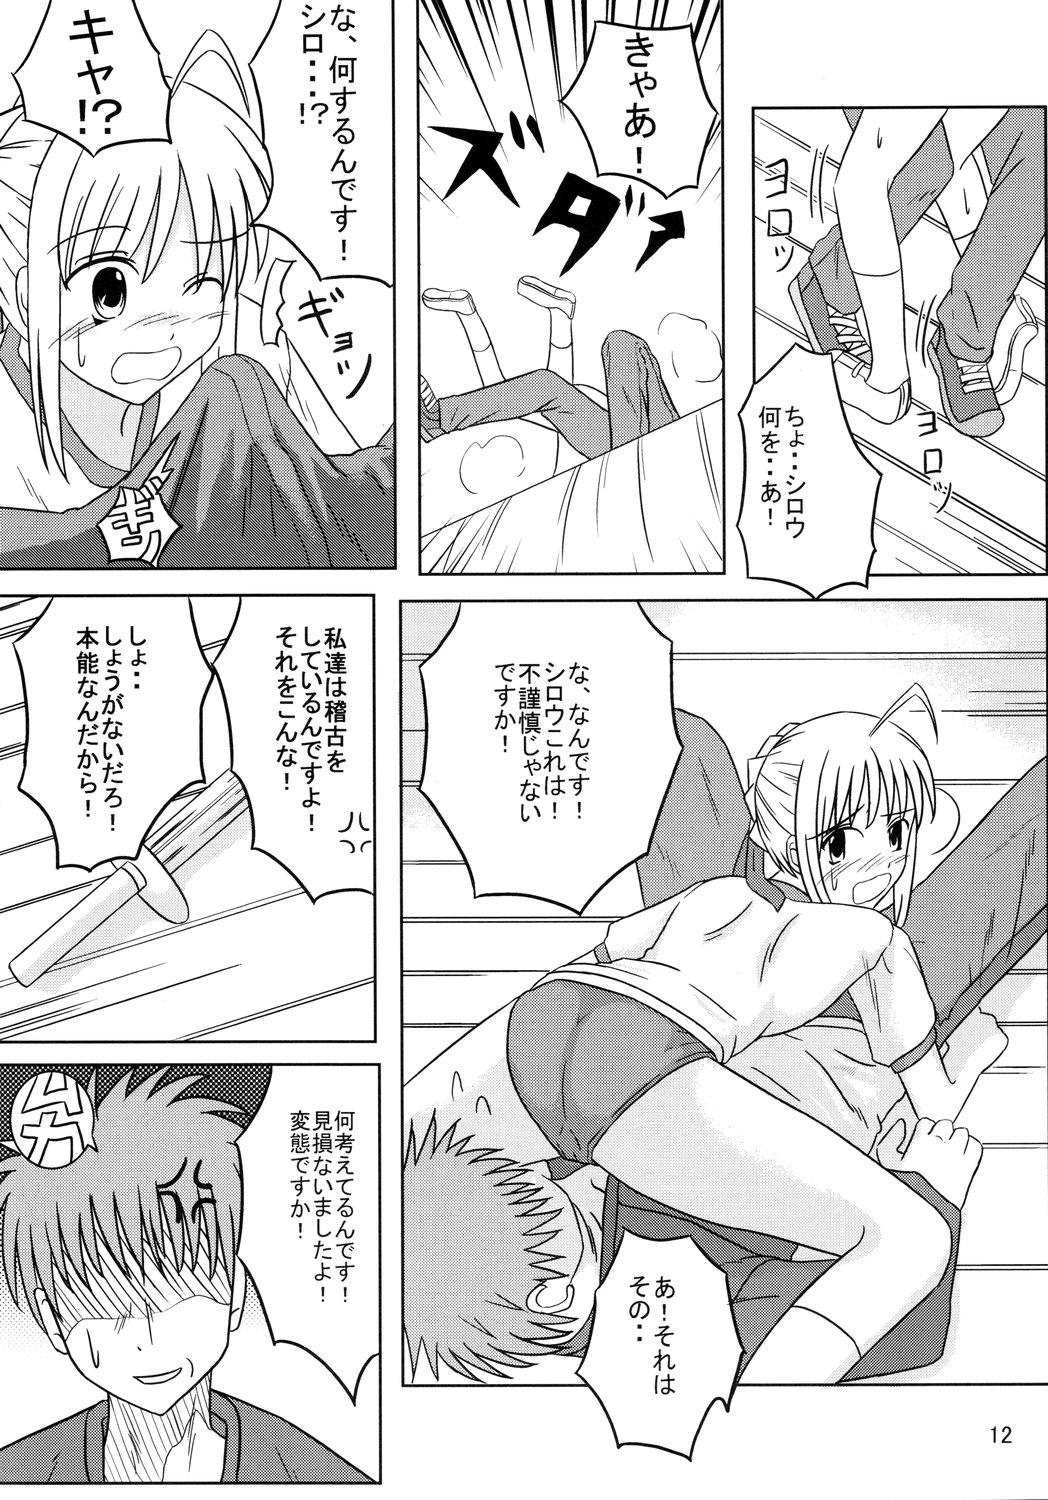 Uncensored Saber Of Sanity - Fate stay night Furry - Page 11